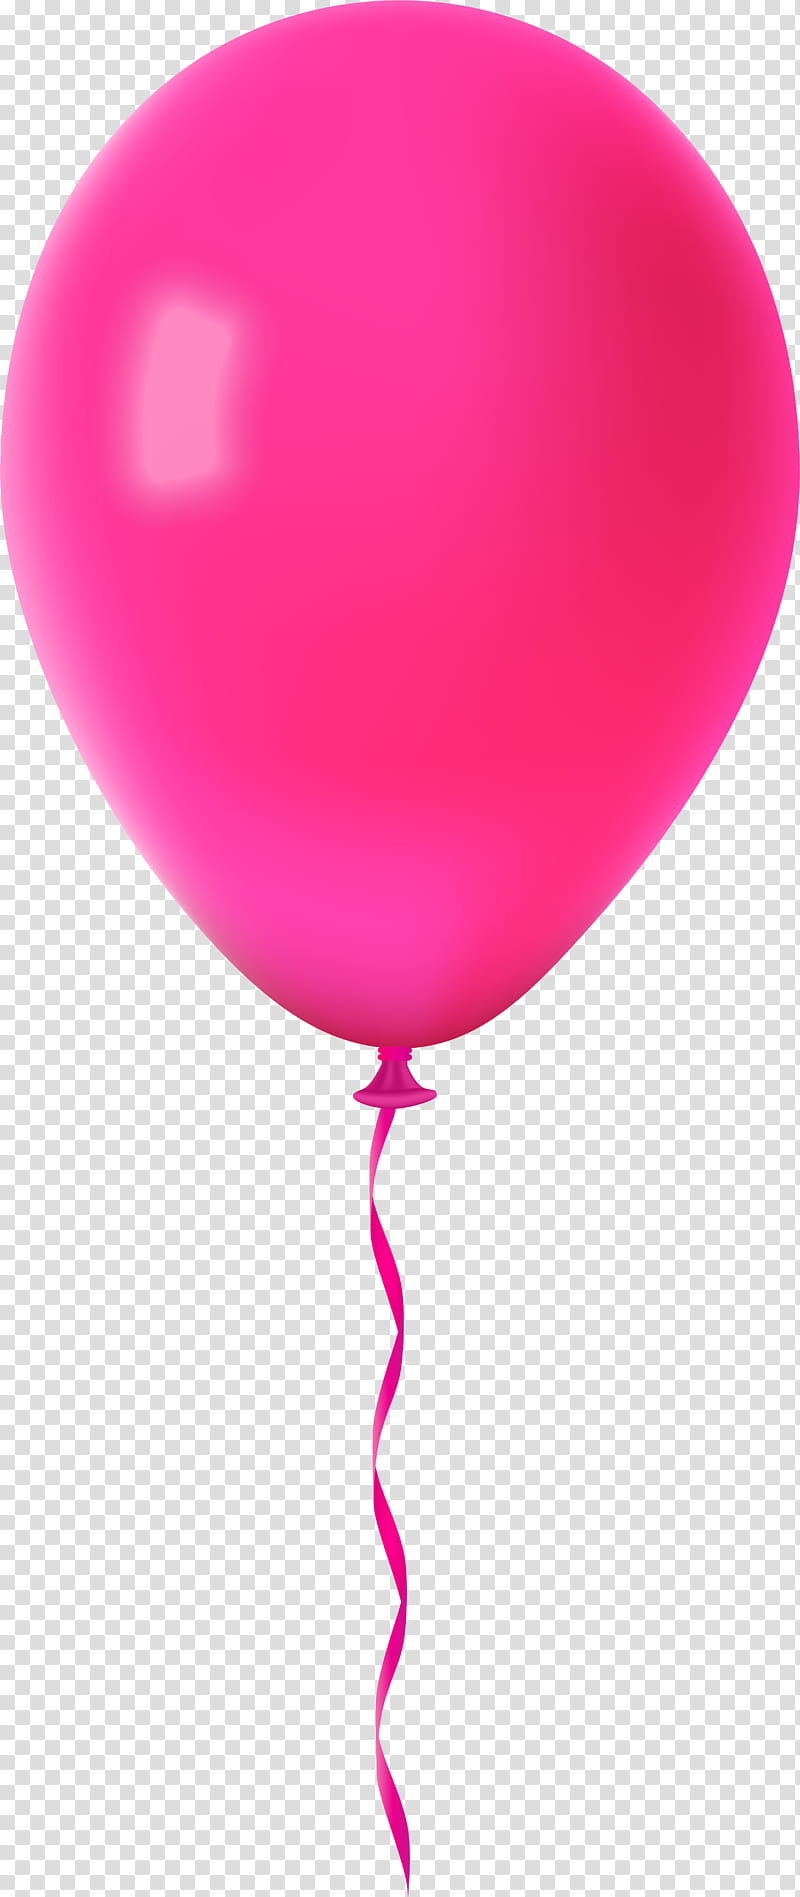 Happy Birthday Balloons, Pink Birthday Balloons, Balloon String, Red, Birthday
, Rose, Magenta, Party Supply transparent background PNG clipart